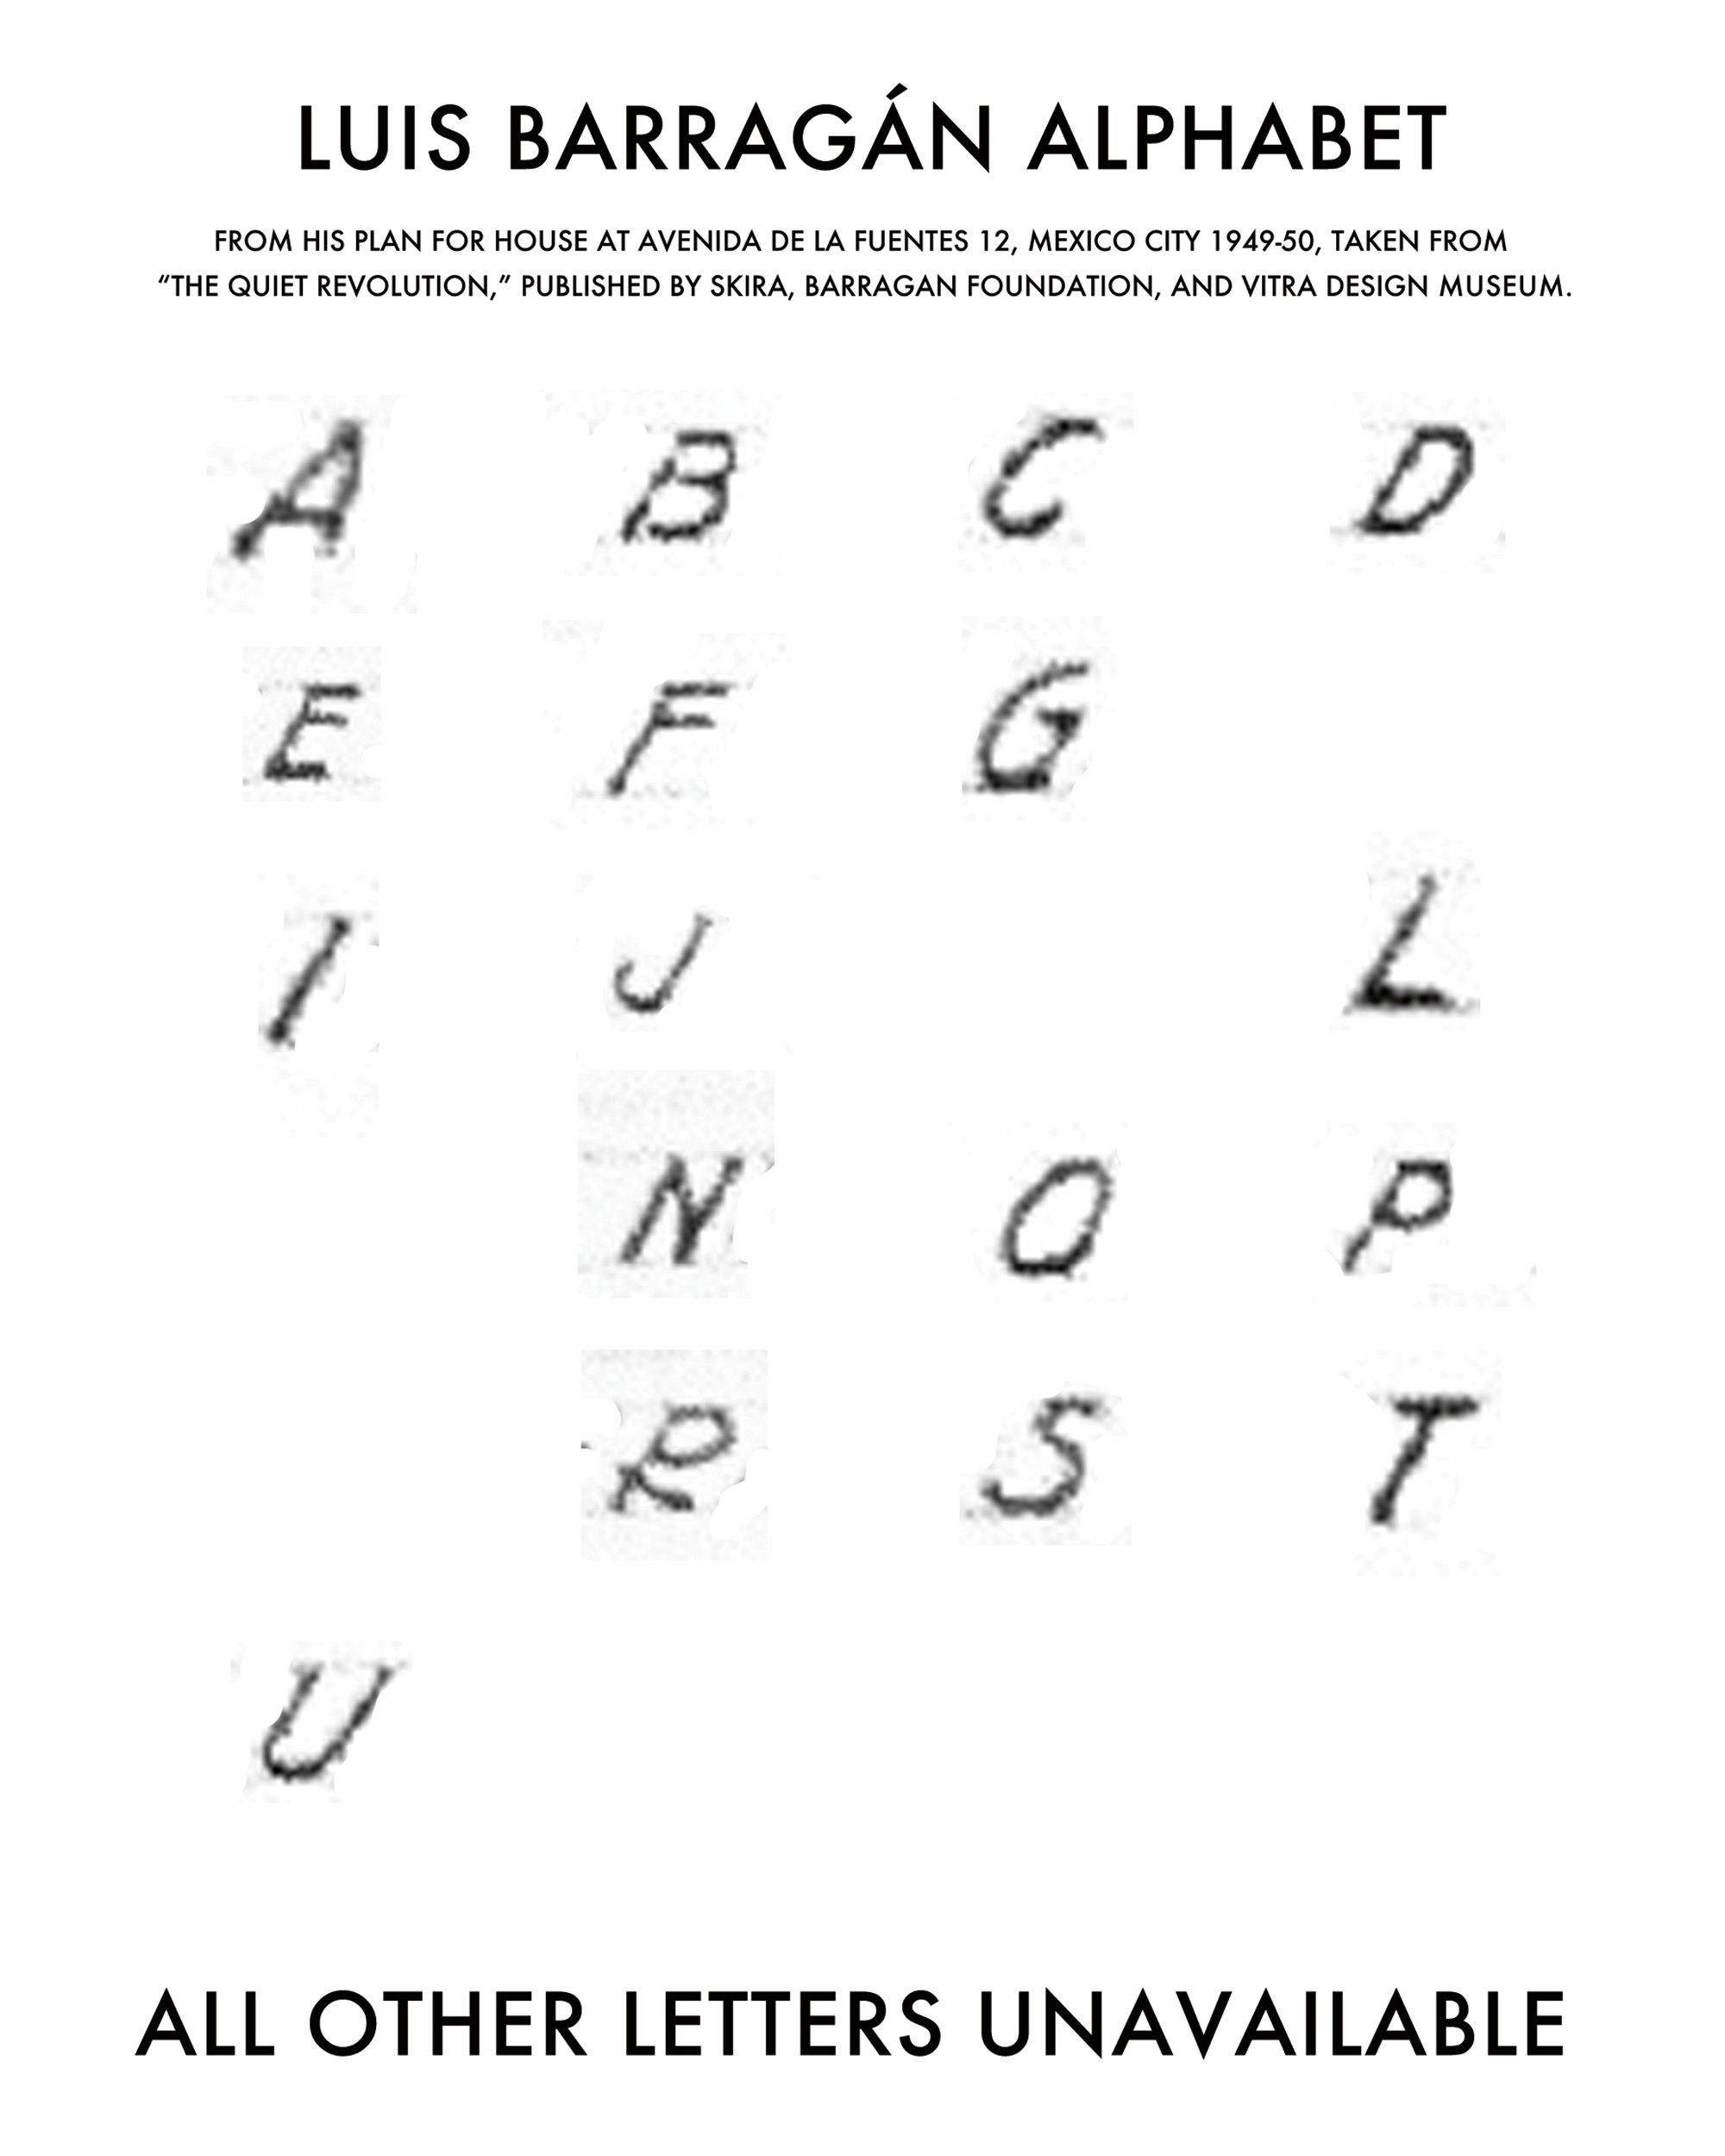 The fourth page of Jill Magid’s artist project “The Barragán Archives,” featuring a scan of a page on which appear the letters A, B, C, D, E, F, G, I, J, L, N, O, P, R, S, T, and U. The accompanying text reads: “Luis Barragán alphabet, from his plan for house at Avenida de las Fuentes 12, Mexico City, nineteen forty-nine to nineteen fifty, taken from “The Quiet Revolution,” published by Skira, Barragán Foundation, and Vitra Design Museum. All other letters unavailable.”